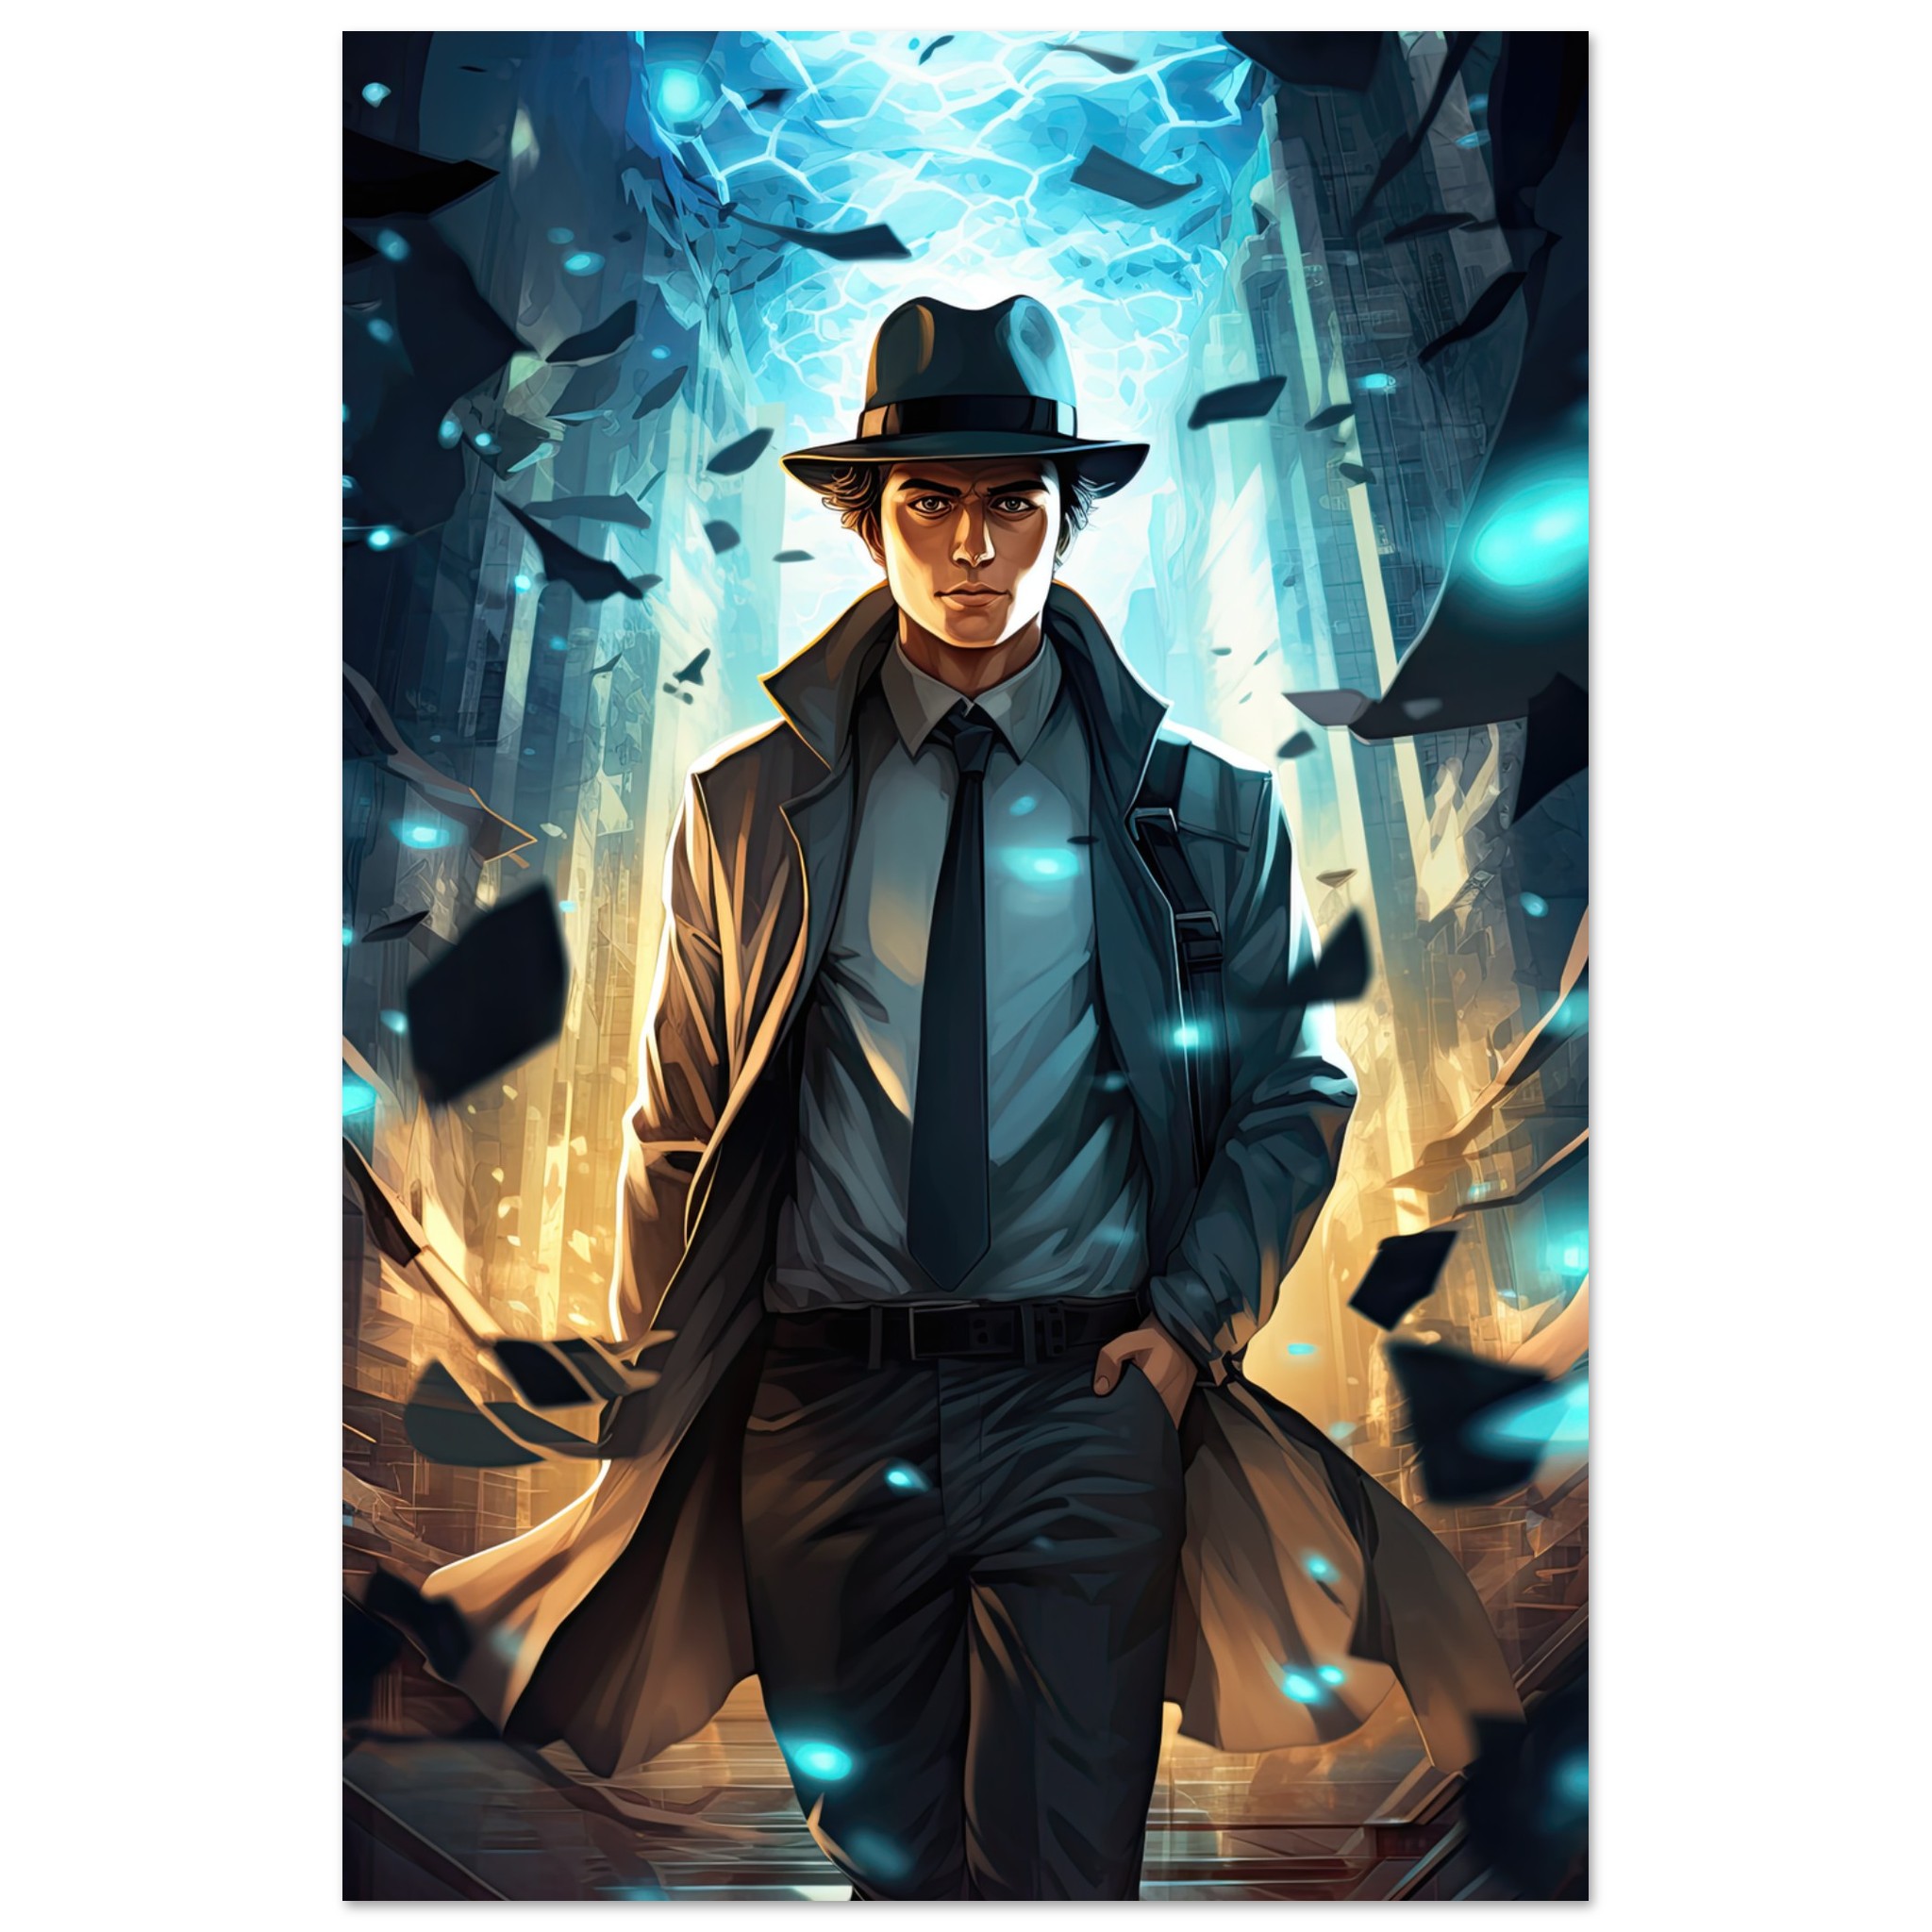 Dimension Hopping Detective Poster – 60×90 cm / 24×36″